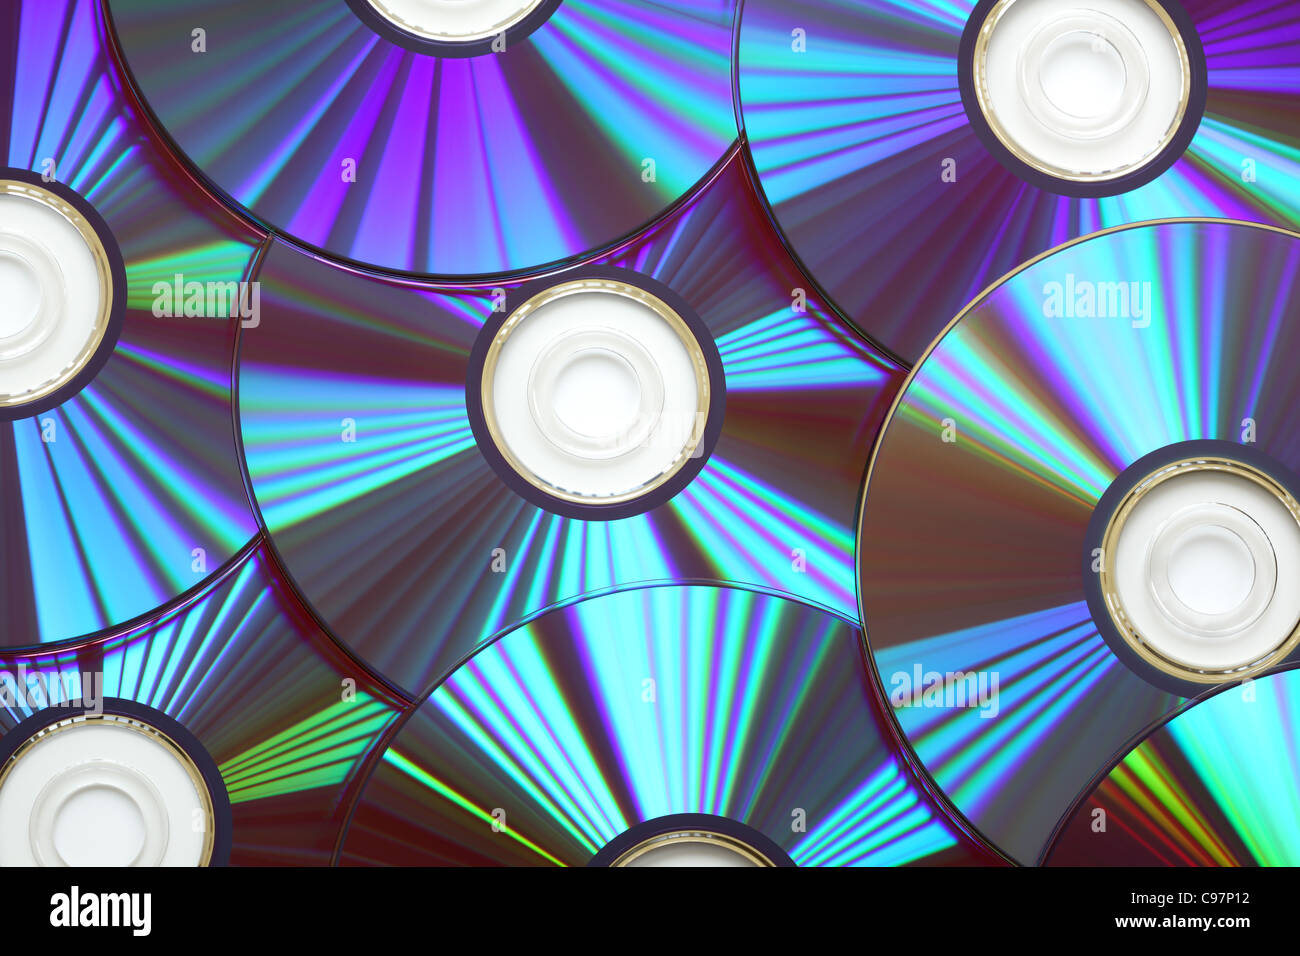 Compact disc or dvd Stock Photo